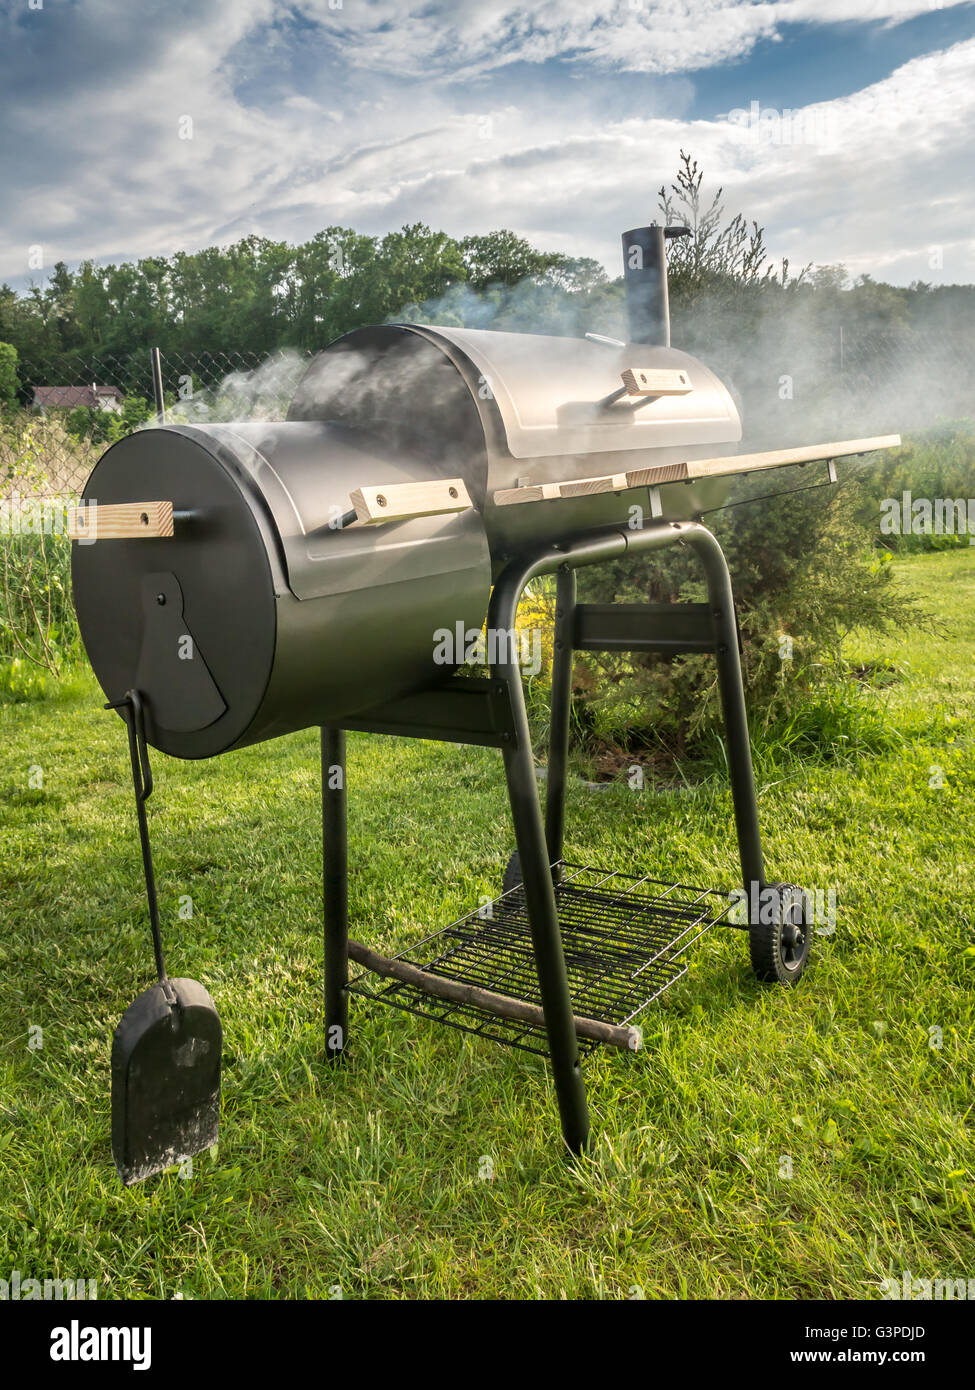 Barbeque meal being prepared using black grill with chimney in the backyard Stock Photo